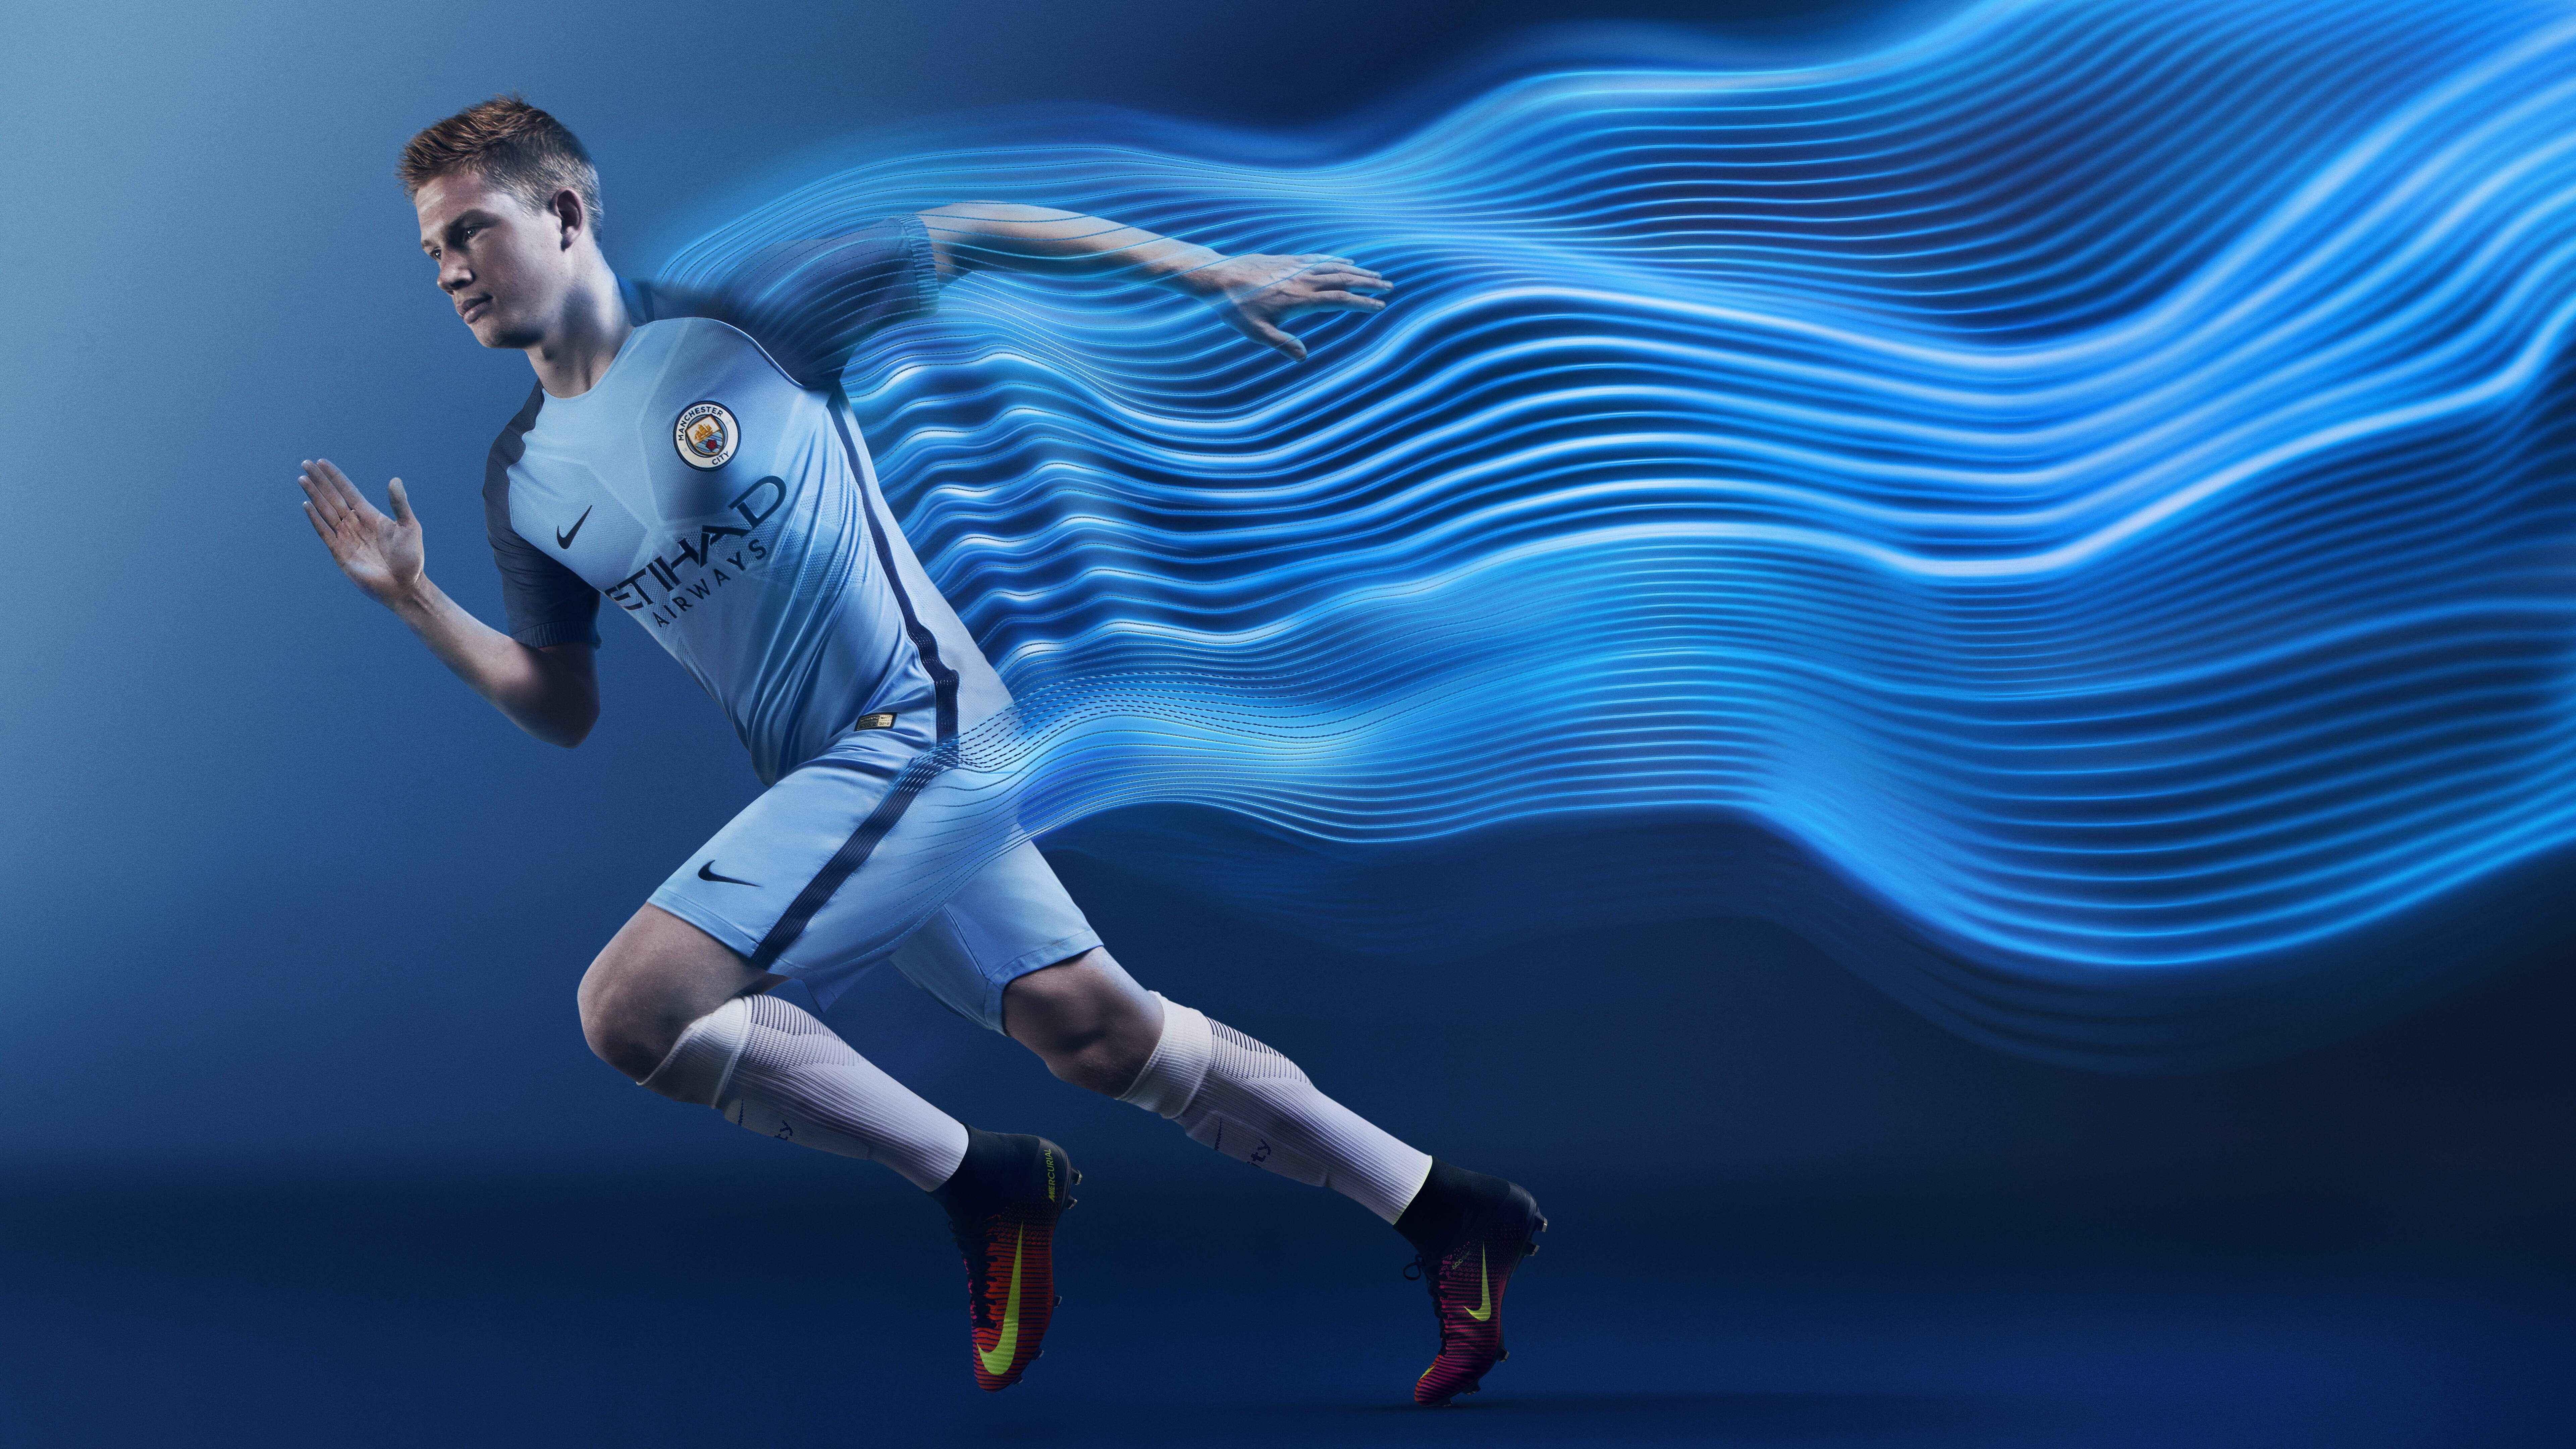 7680x4320 Manchester City Football Player 8k HD 4k Wallpapers, Images,  Backgrounds, Photos and Pictures